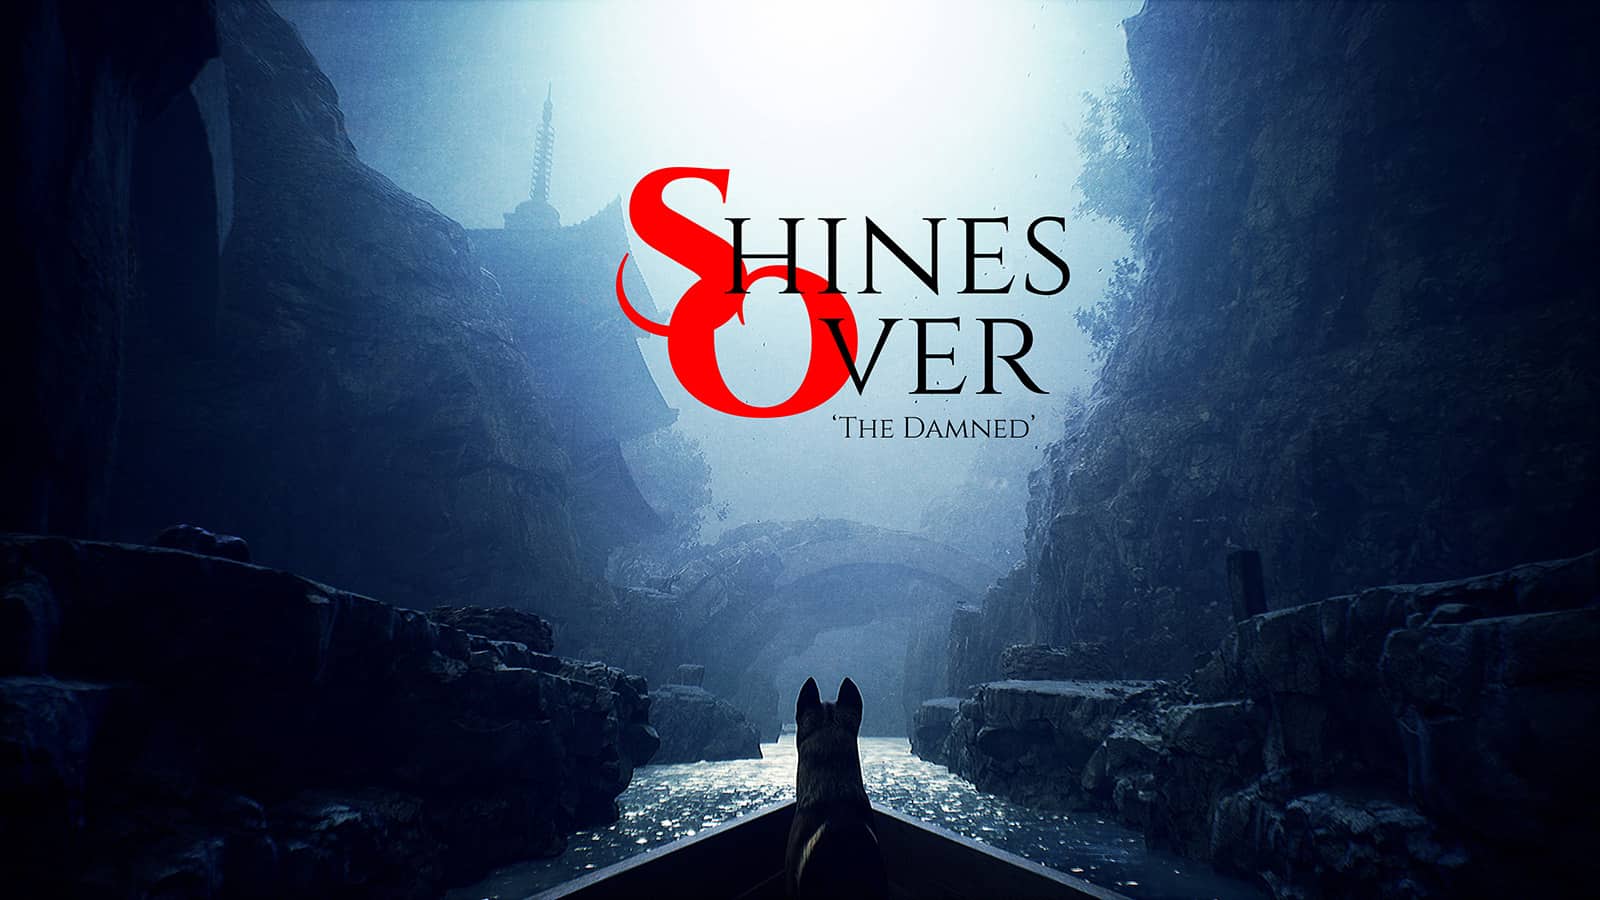 Shines Over: The Damned Is A First-Person Horror Game Launching On PS5 This Month